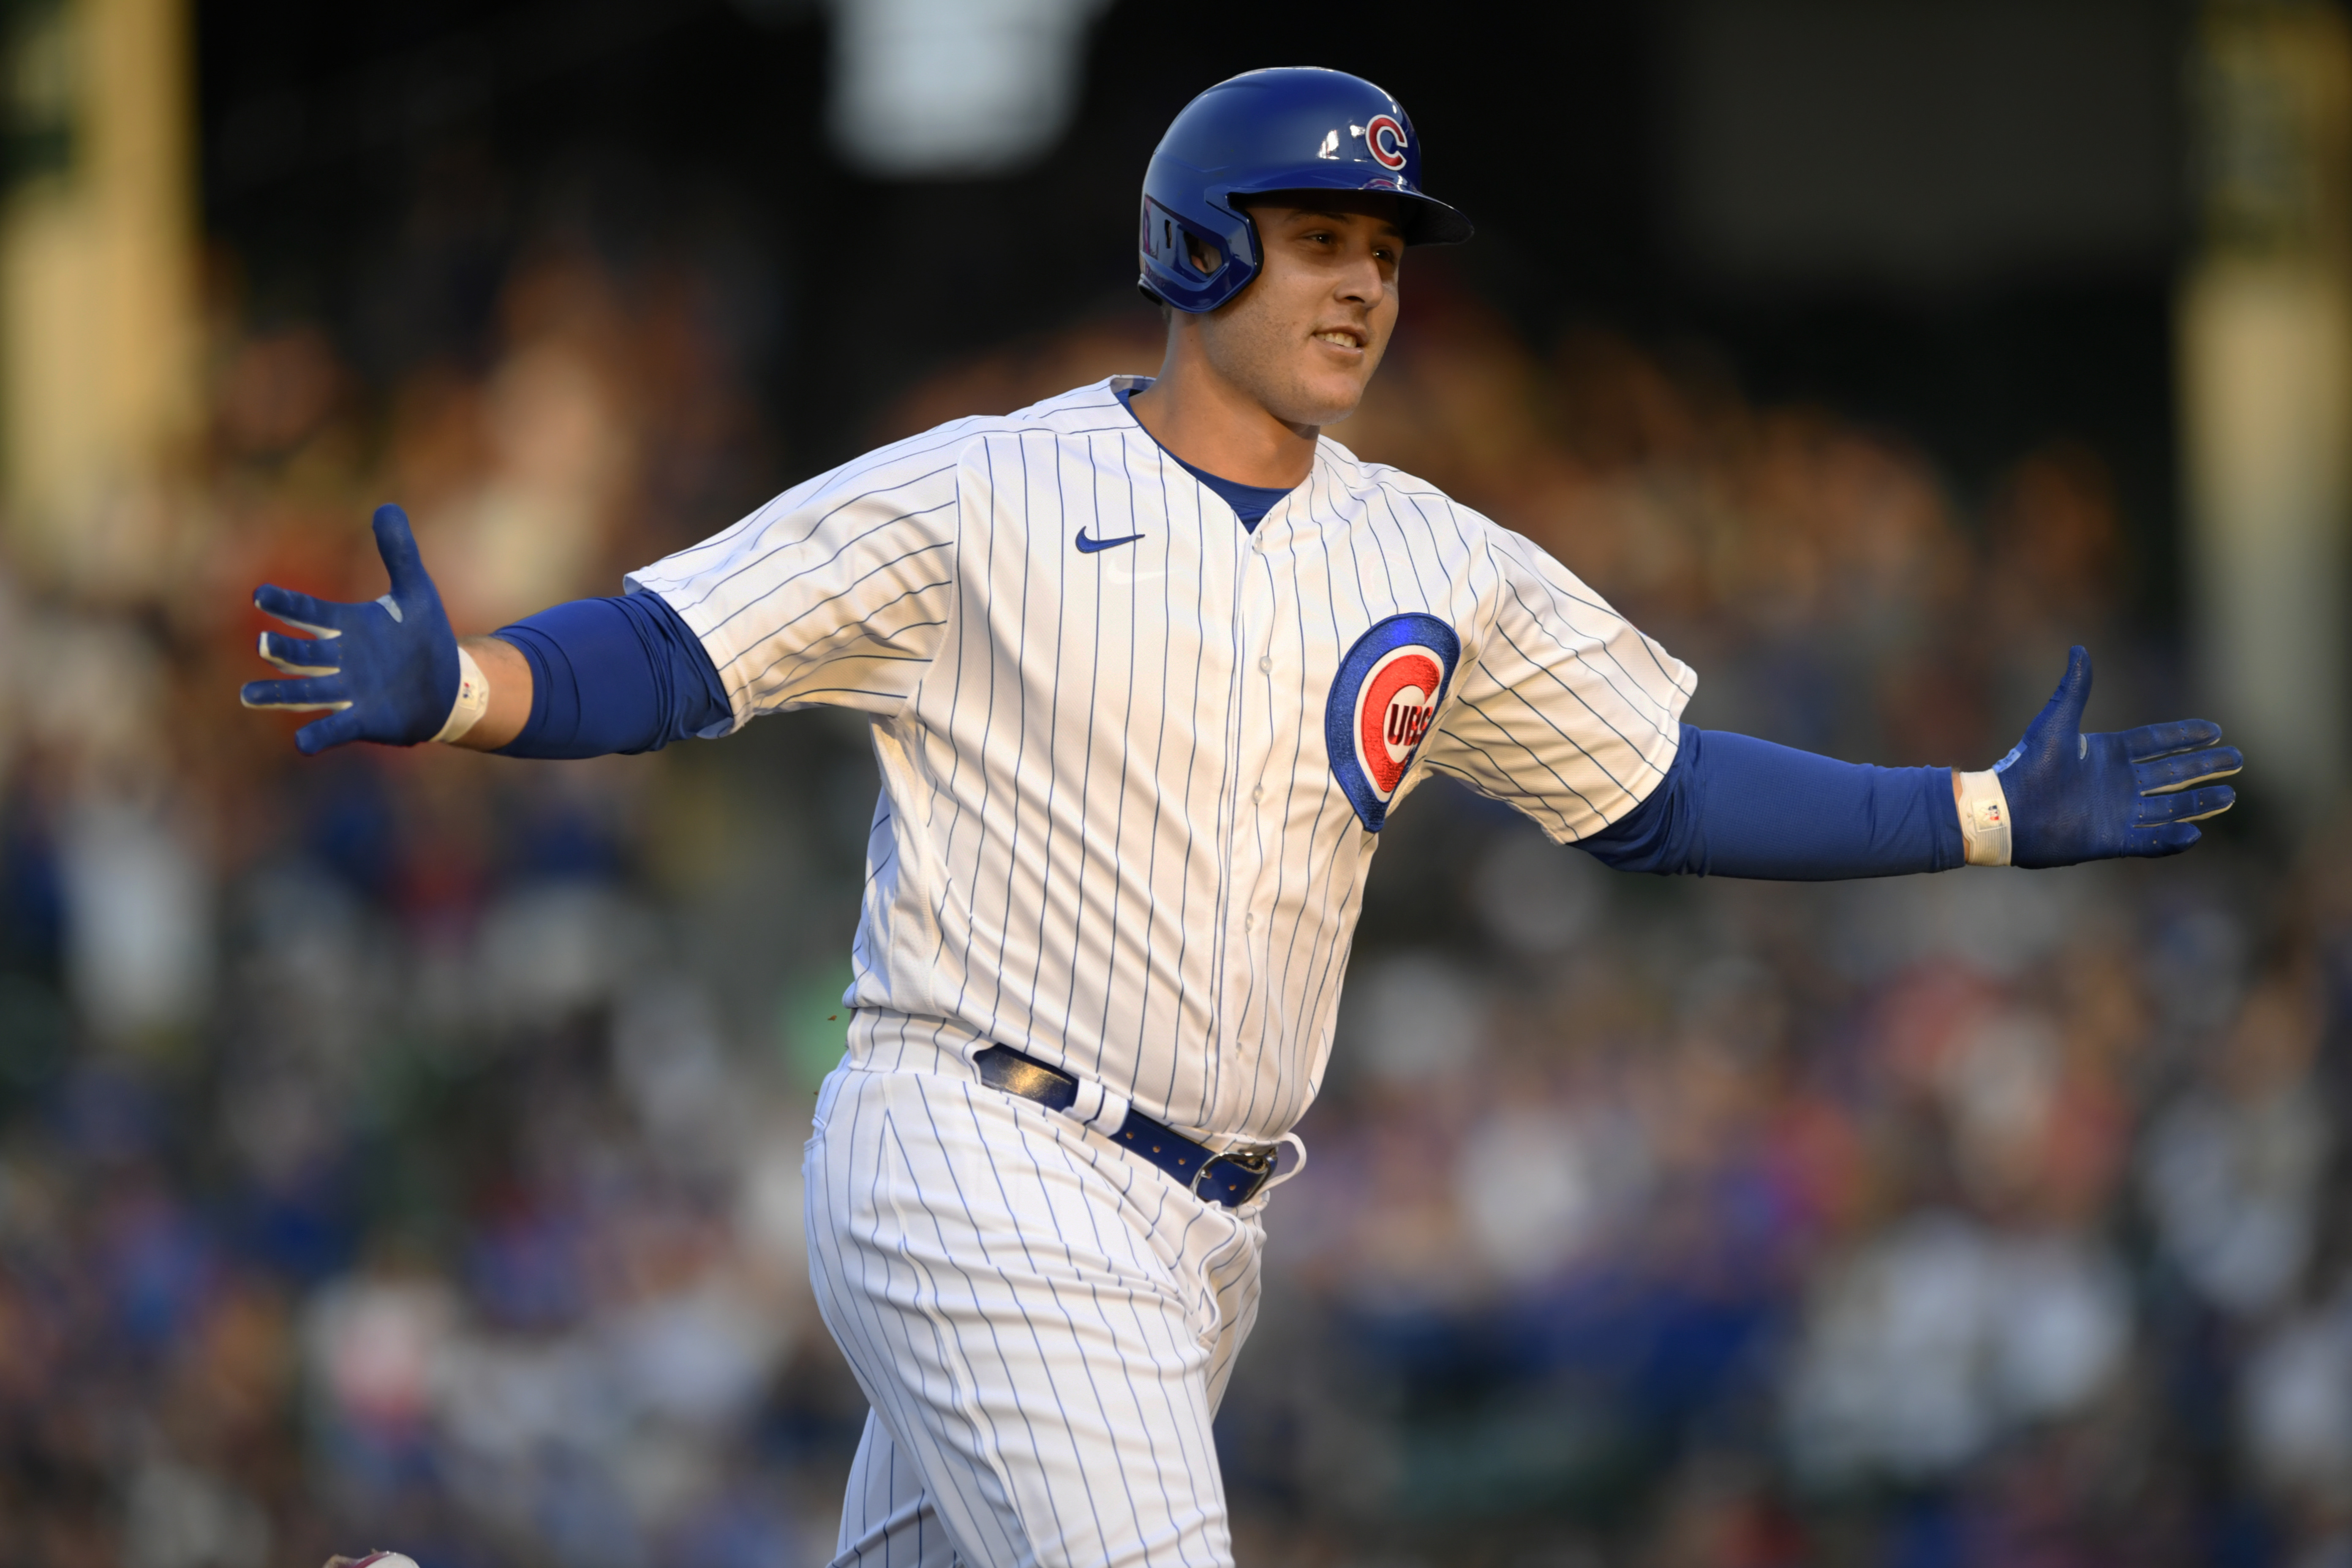 How to buy Yankees' Anthony Rizzo jersey, tickets to see slugger